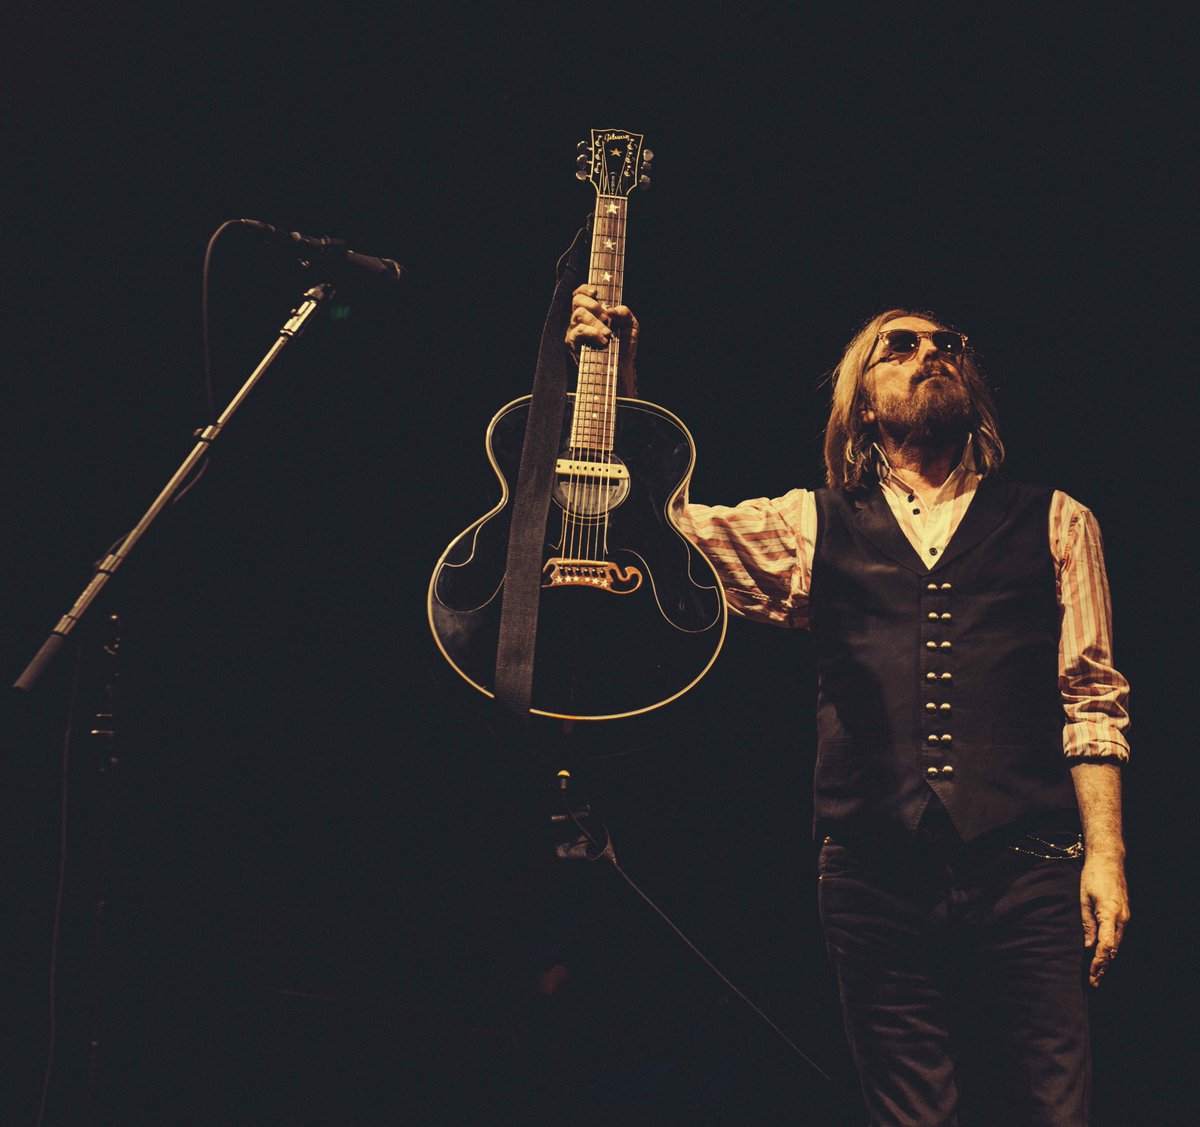 On October 2nd, our thoughts turn to Tom and how much we miss him and his deep, arresting spirit on this planet. His greatest love was creating music and being part of the music community. To honor him, we have created the Tom Petty Endowment for Guitars and Innovation at @UFCOTA